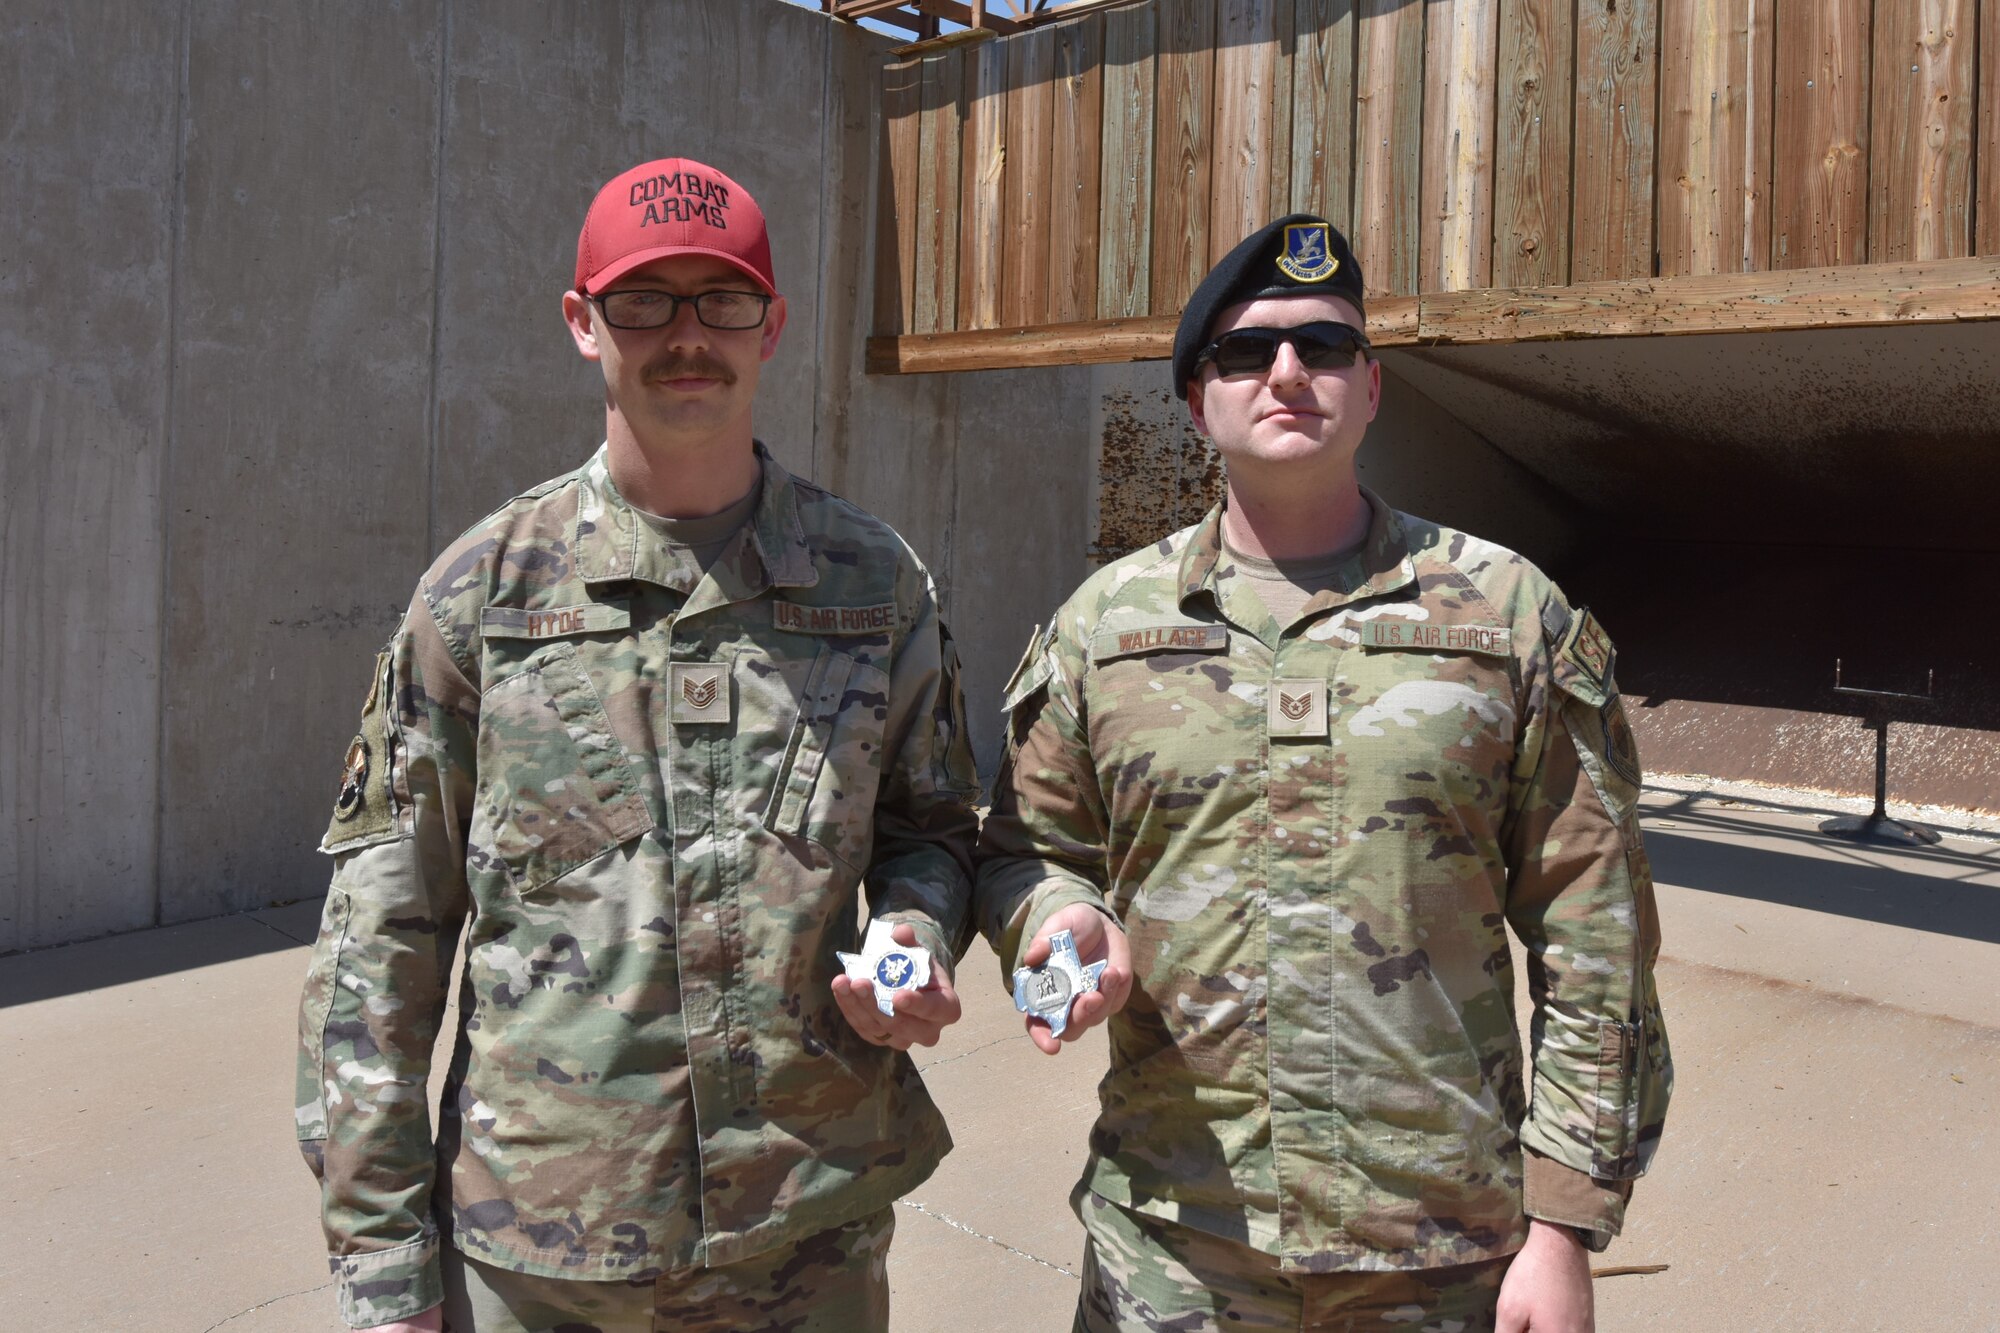 Two Airmen stand next to each other with coins in their hands